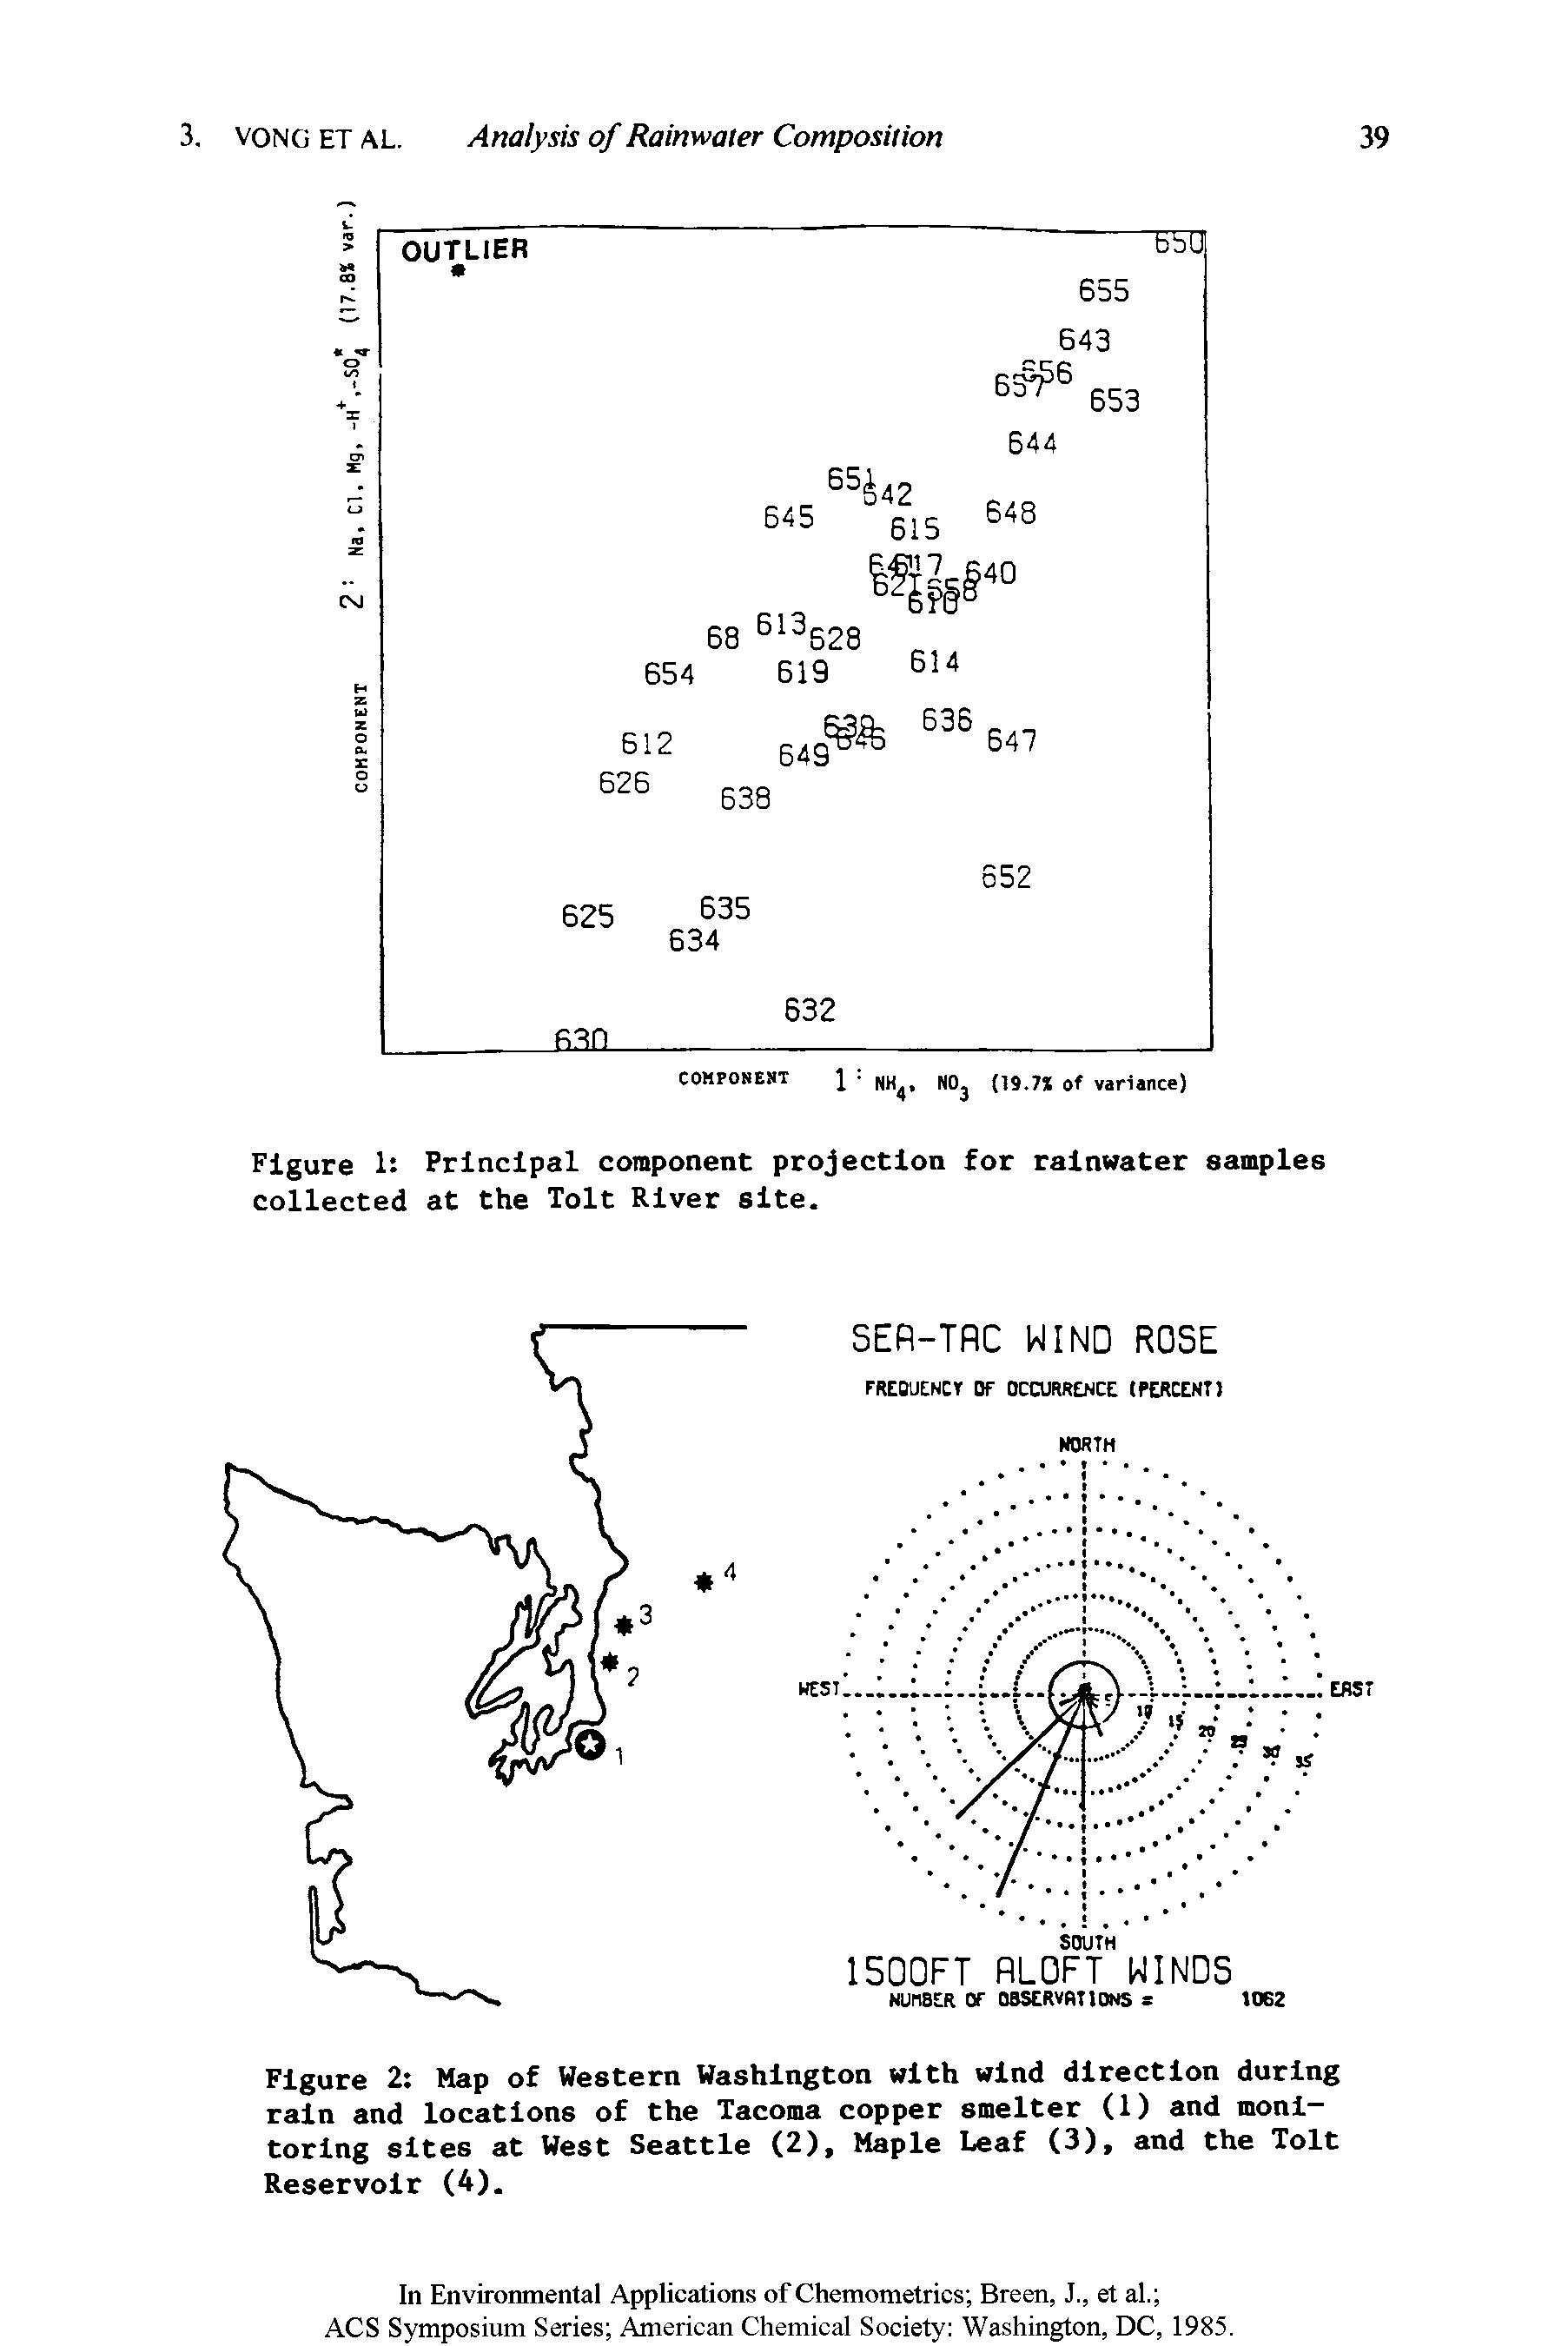 Figure 2 Map of Western Washington with wind direction during rain and locations of the Tacoma copper smelter (1) and monitoring sites at West Seattle (2), Maple Leaf (3), and the Tolt Reservoir (4).